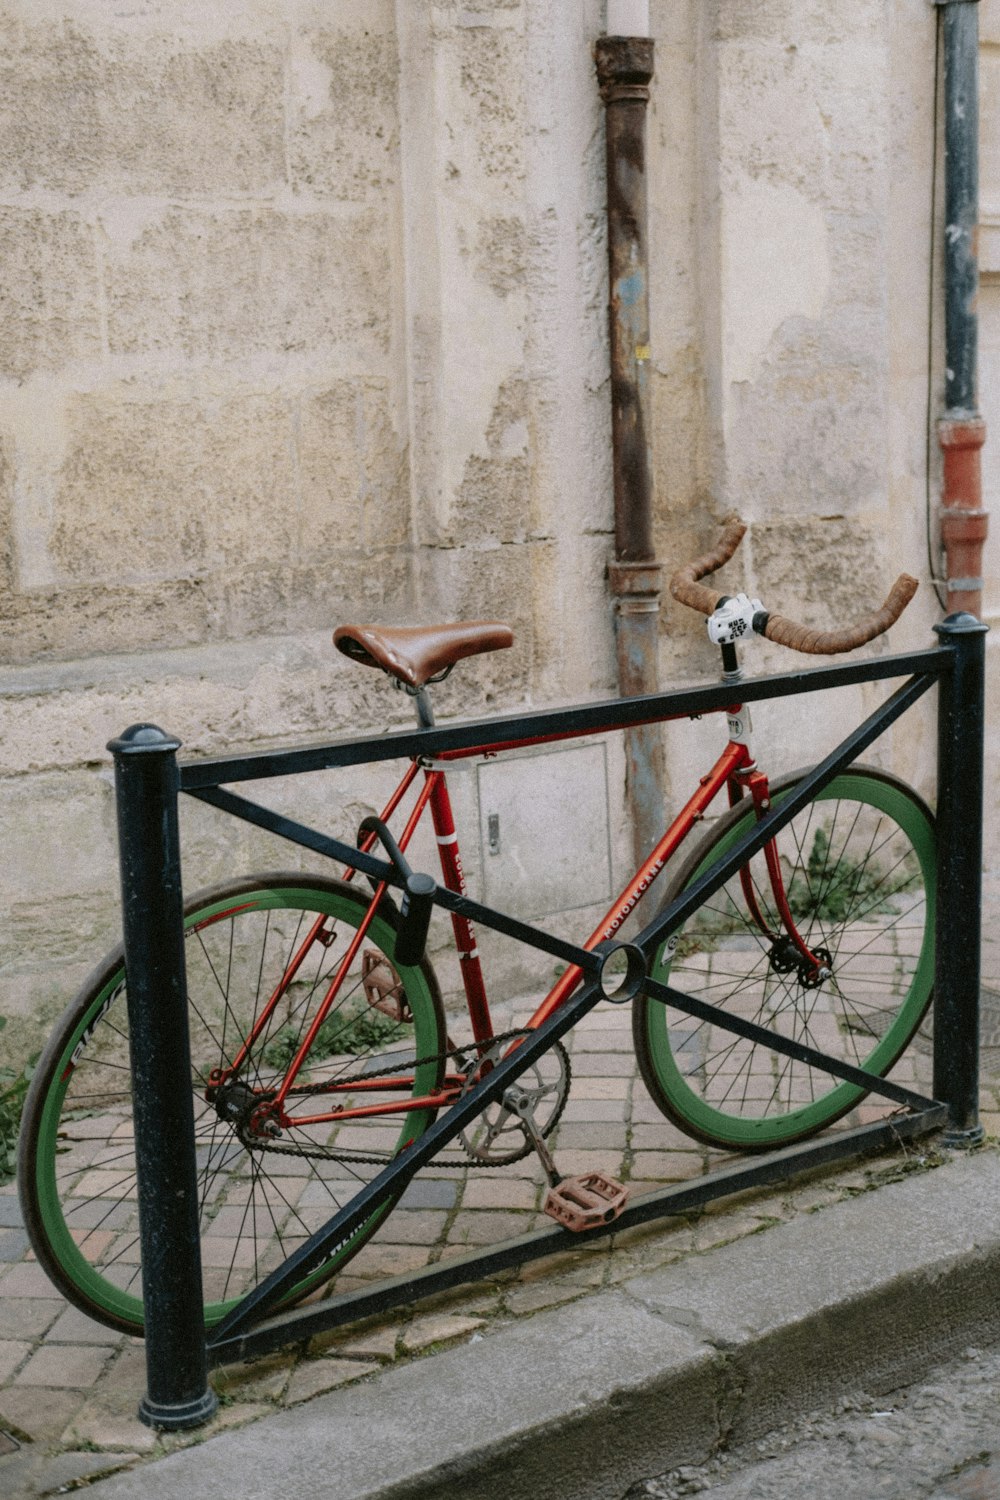 a bicycle locked to a metal fence on a sidewalk